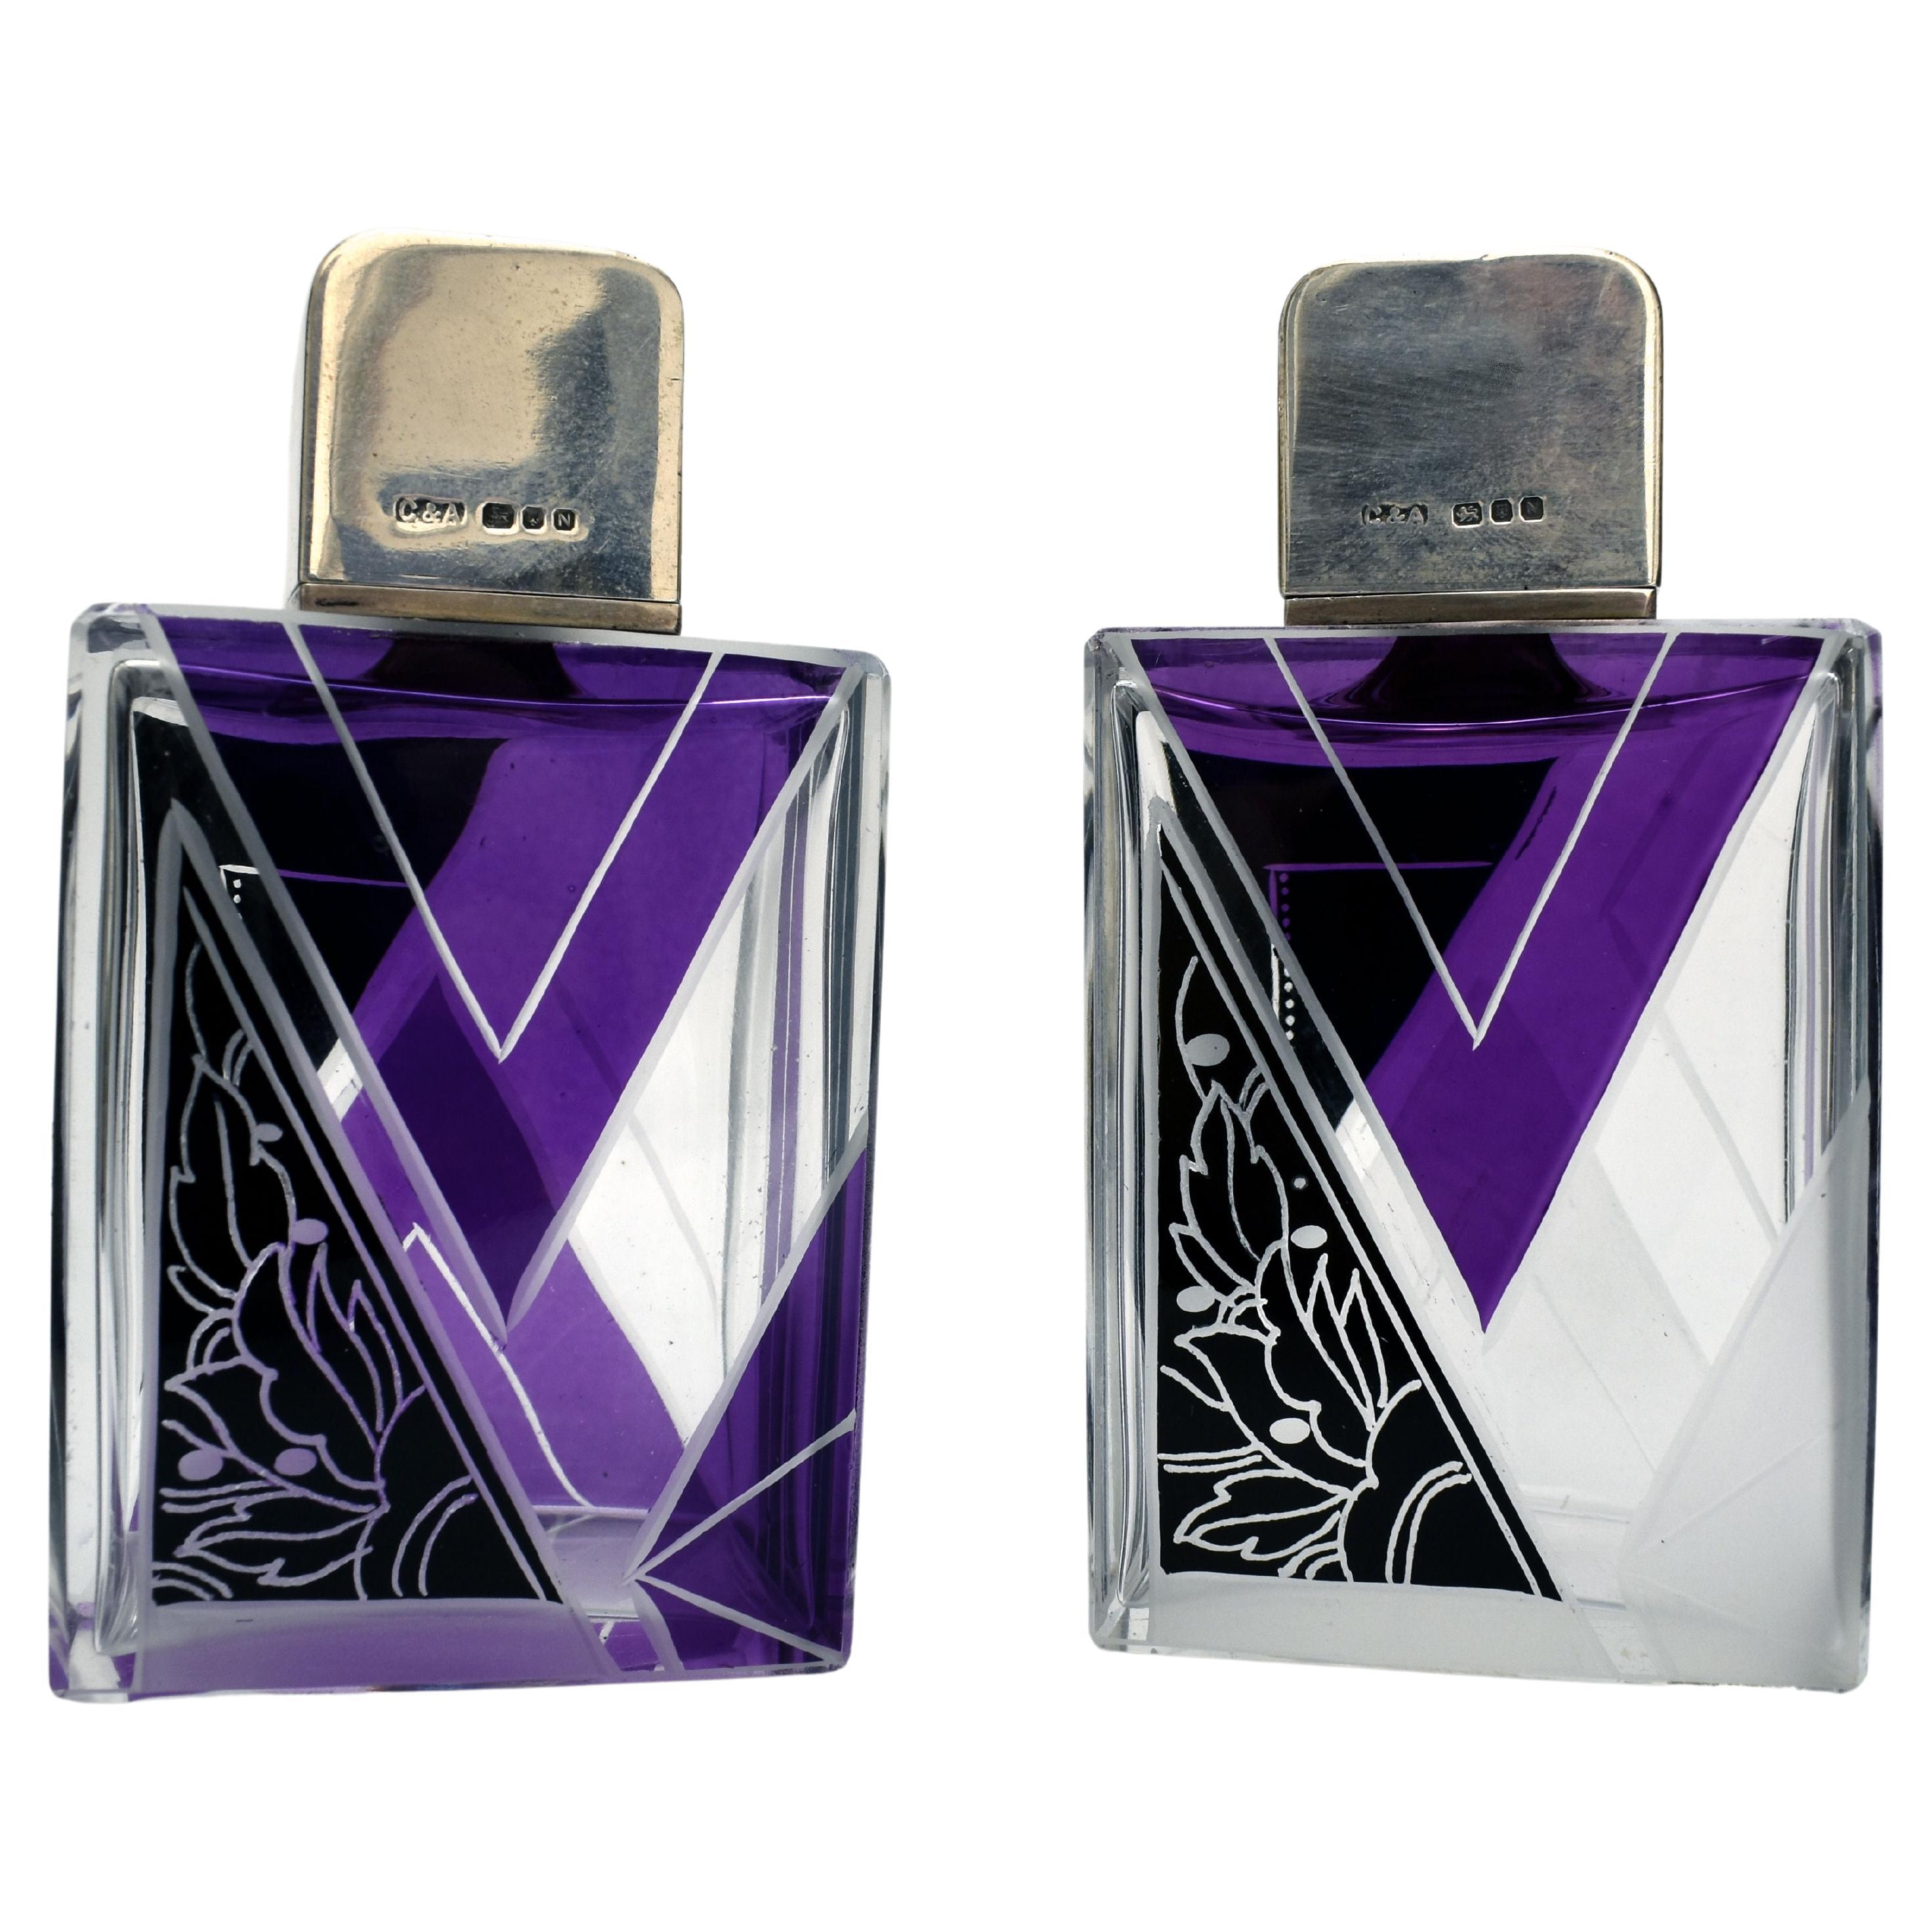 Art Deco Matching Gents Glass and Silver Cologne Bottles, circa 1930